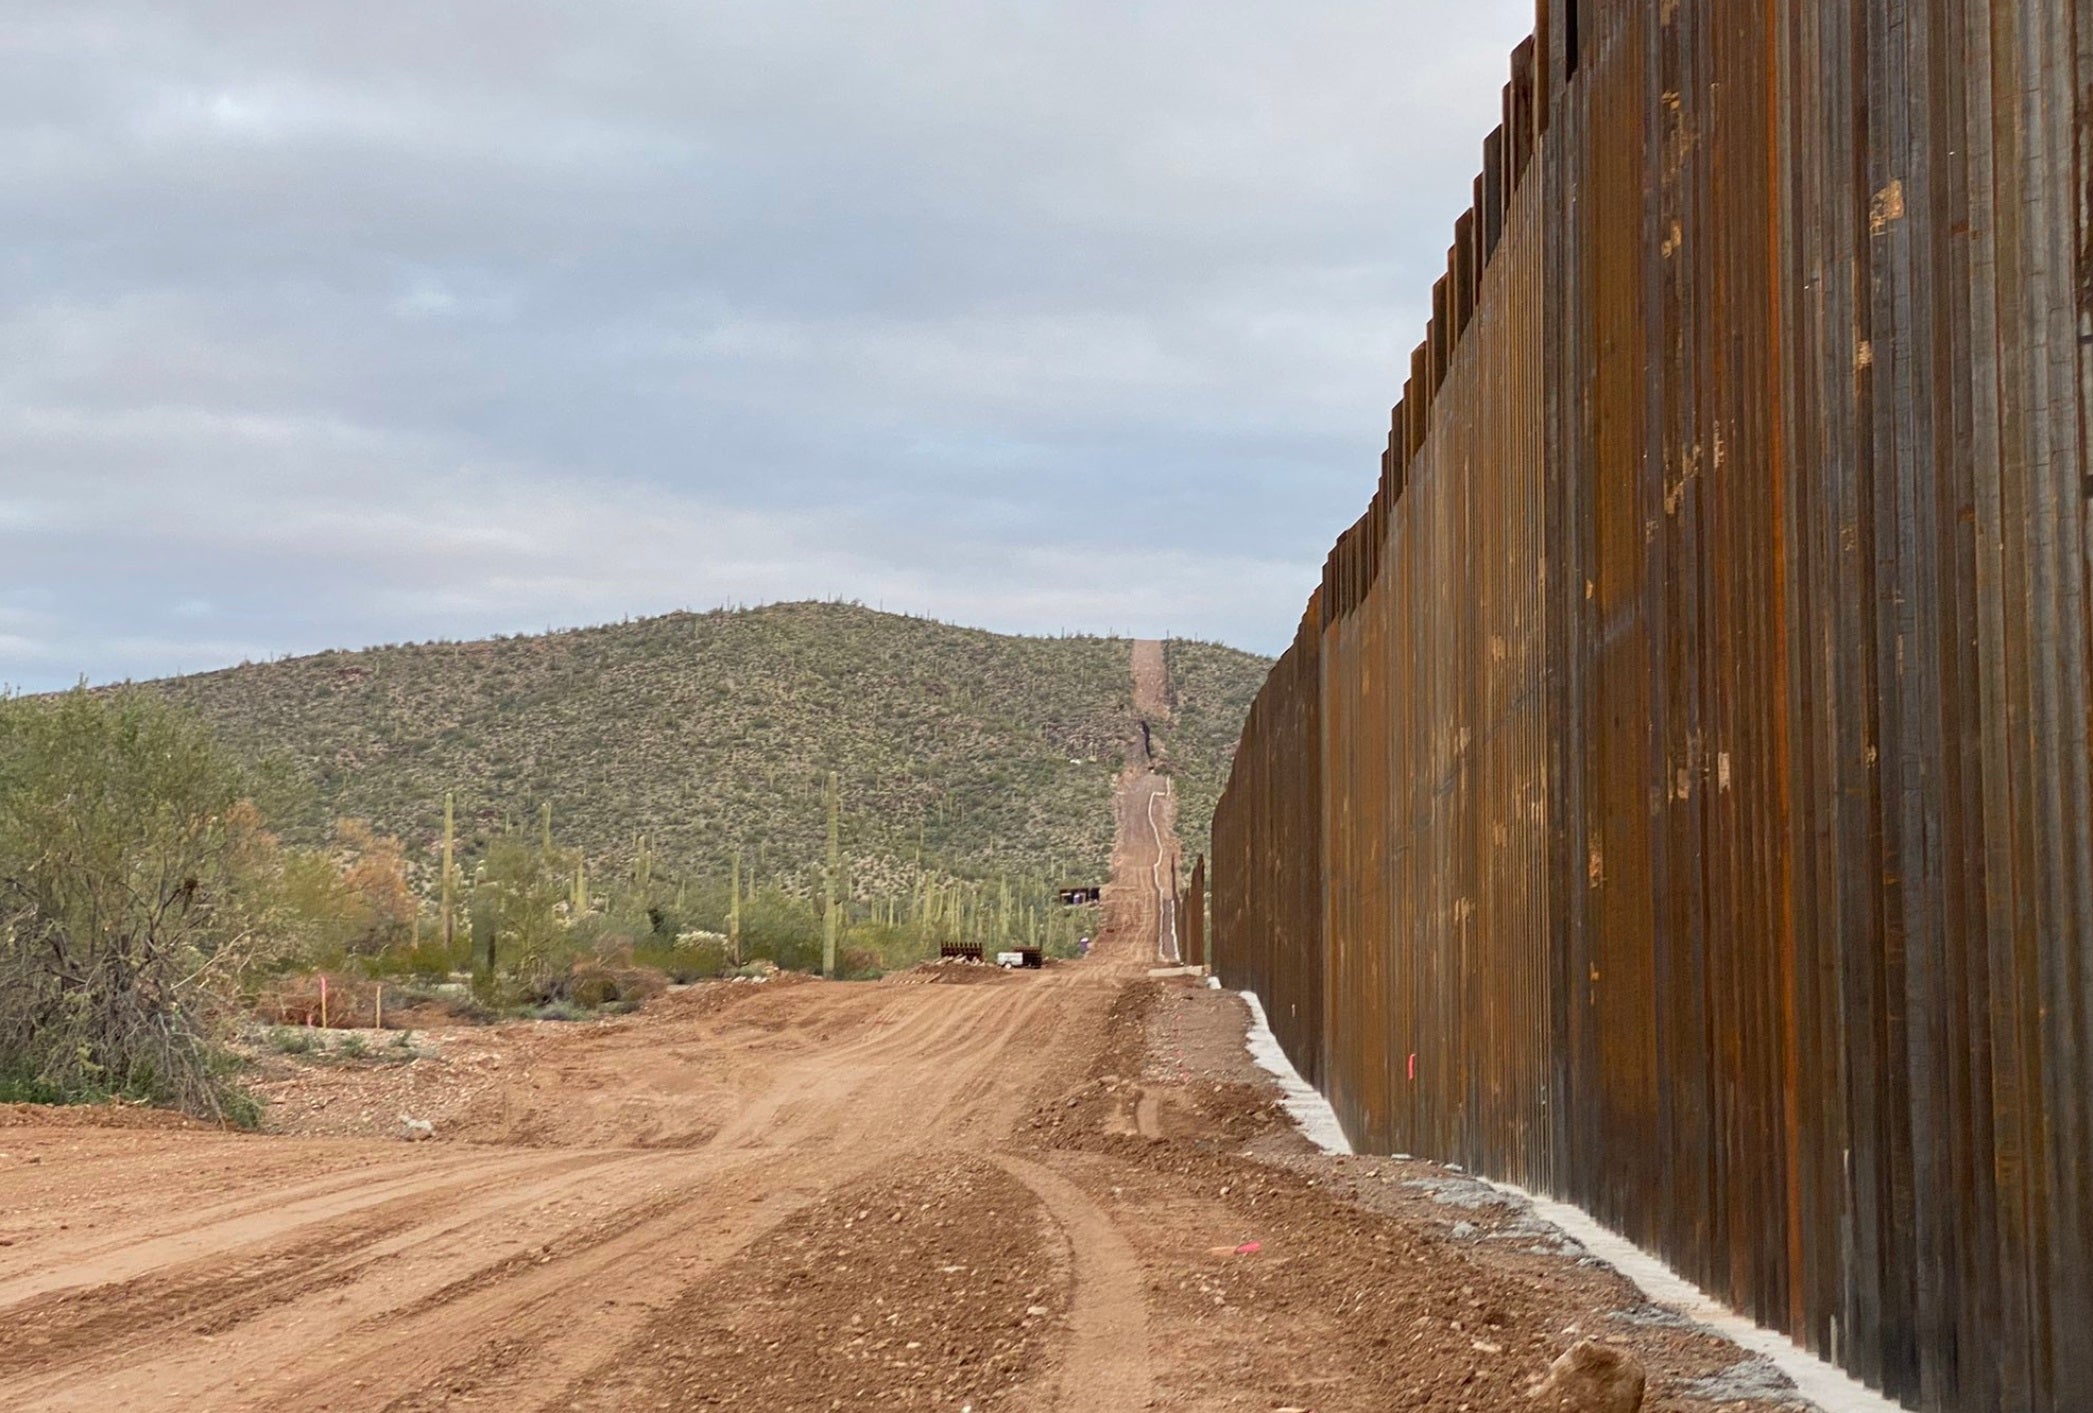 How the Trump border wall sapped a desert oasis dry